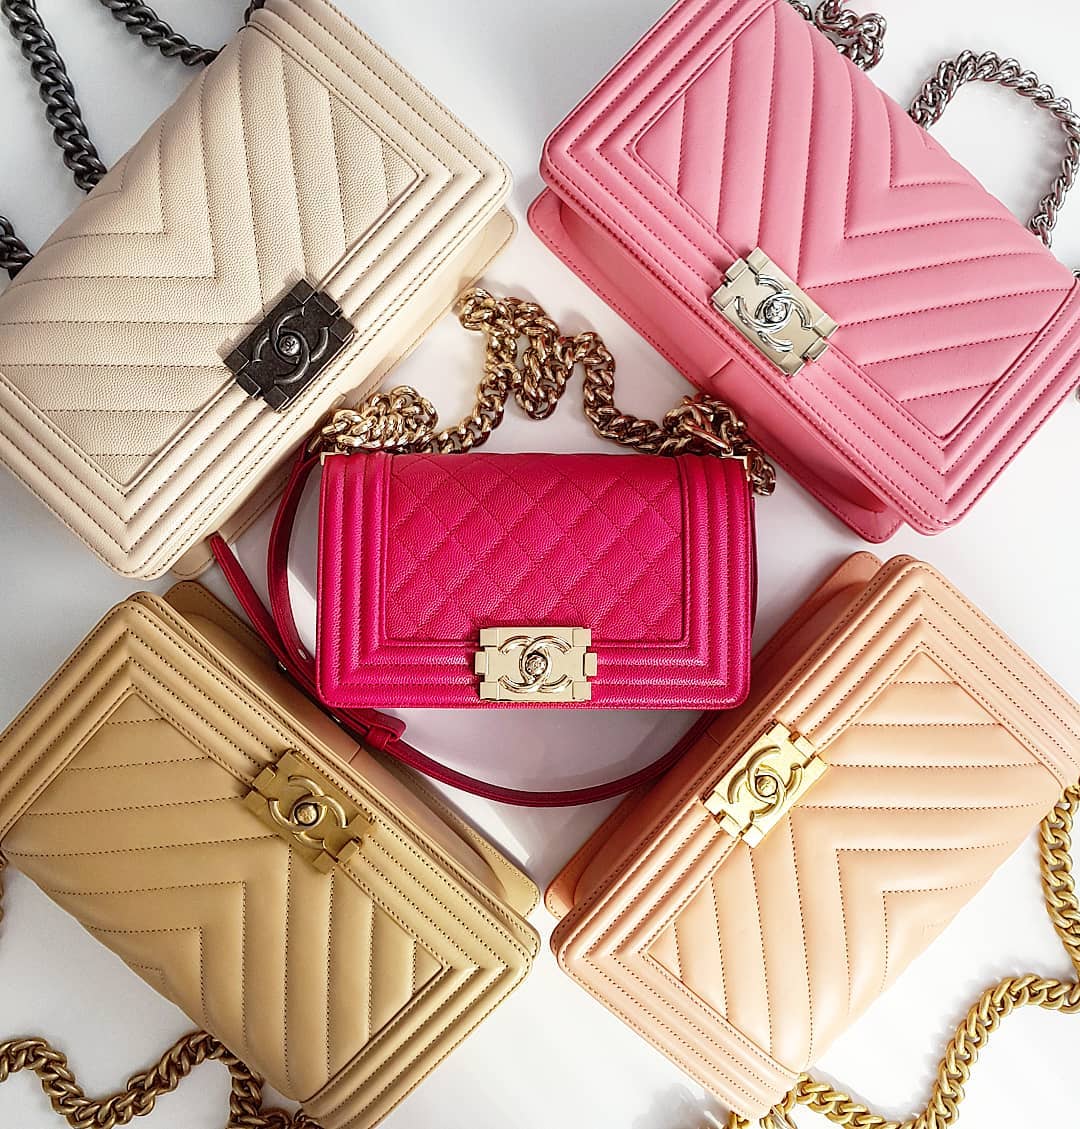 The Story Behind That Instagram Famous “It” Bag - PurseBlog